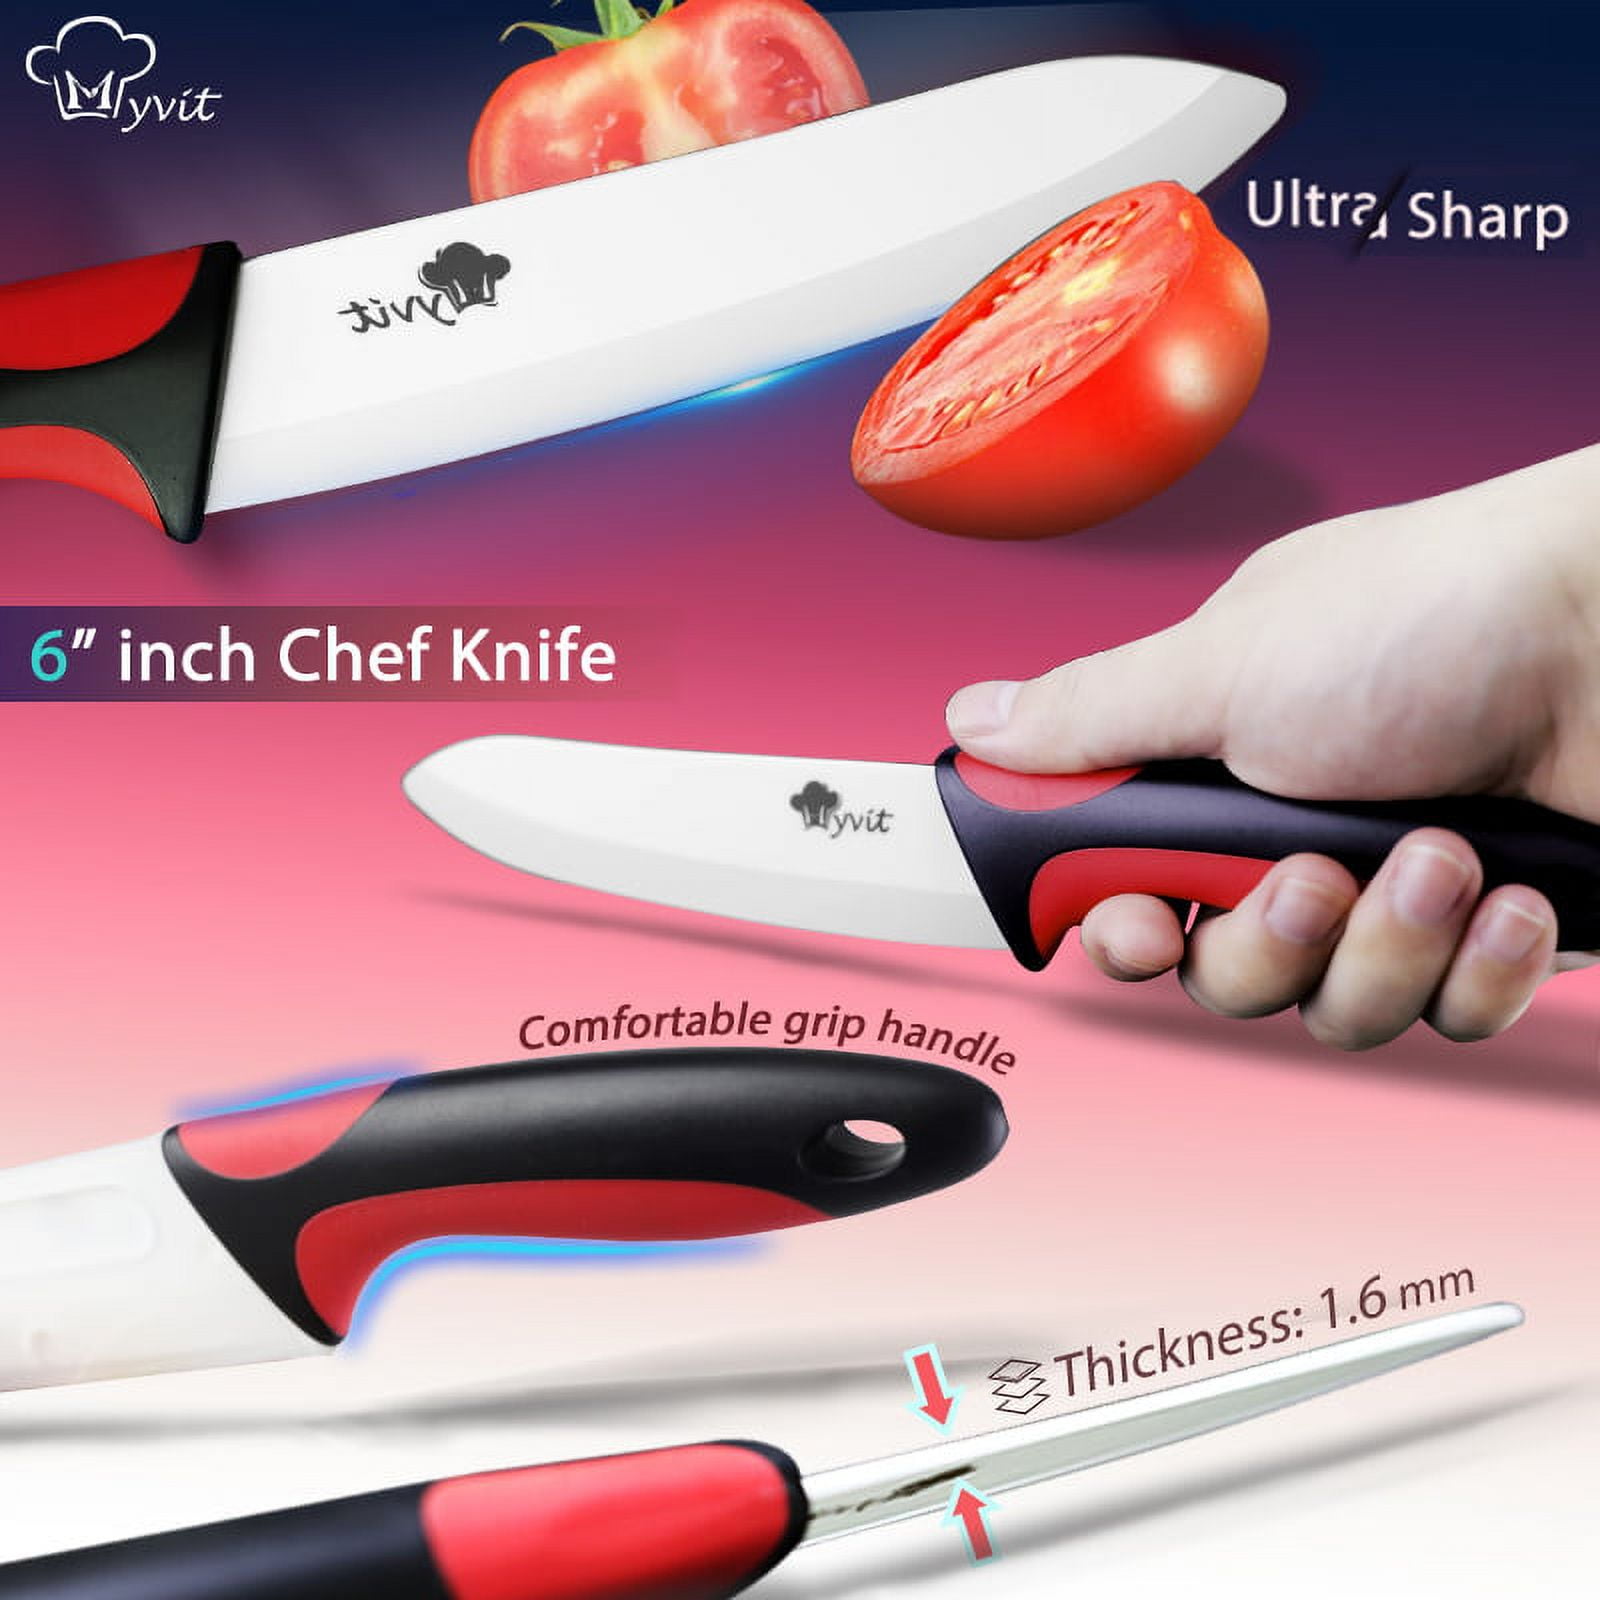 SENDAIST Set of 3 Sharp ceramic Kitchen Knives With Anti-slip handle &  sheath - 6A chef Knife, 5A Utility Knife and 3 Fruit Knife by Send